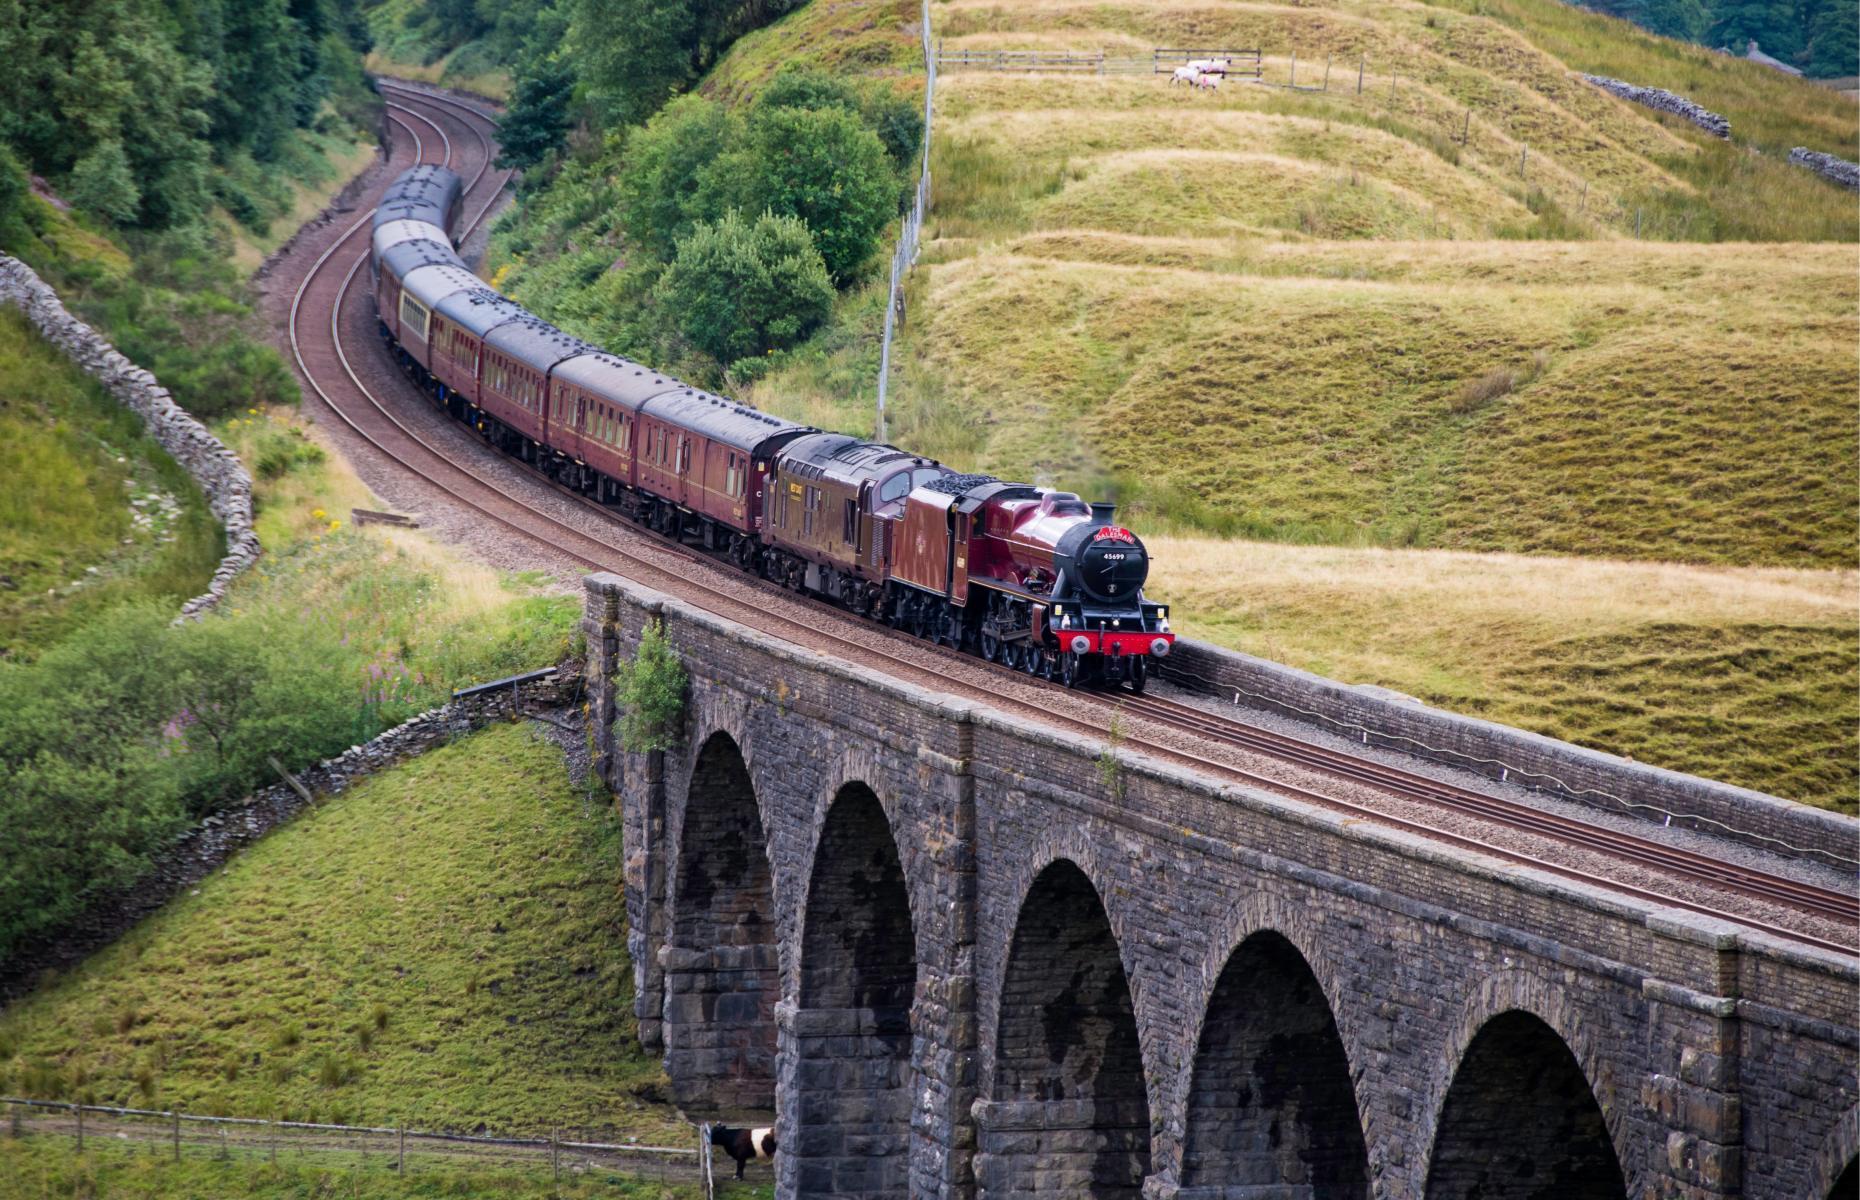 Known as the birthplace of train travel, taking a trip across the UK by rail is the ultimate way to explore its breathtaking natural beauty and incredible attractions. From epic cross-country adventures to shorter heritage steam trains across the idyllic countryside and pretty coastlines, here we take a look at the most charming rail journeys in the UK.